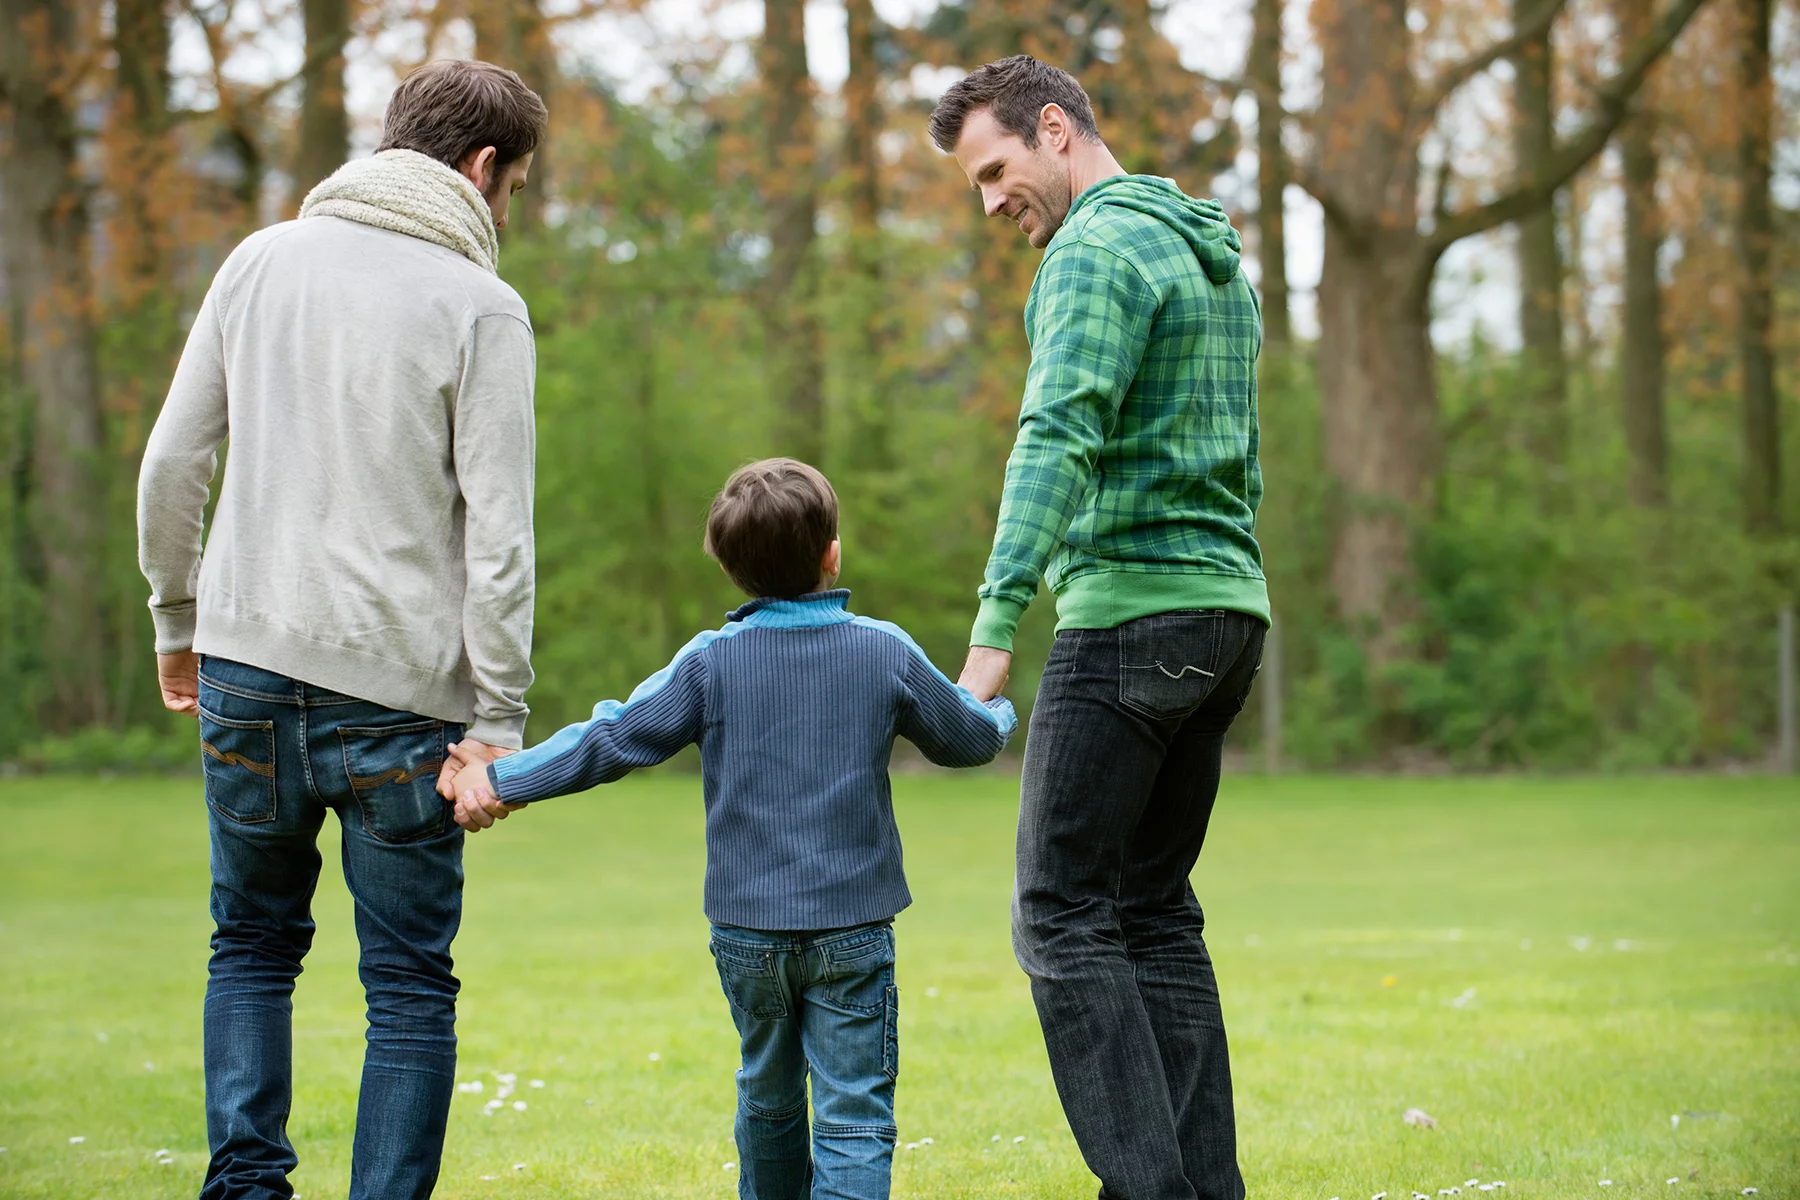 A boy walking with his dads in a park